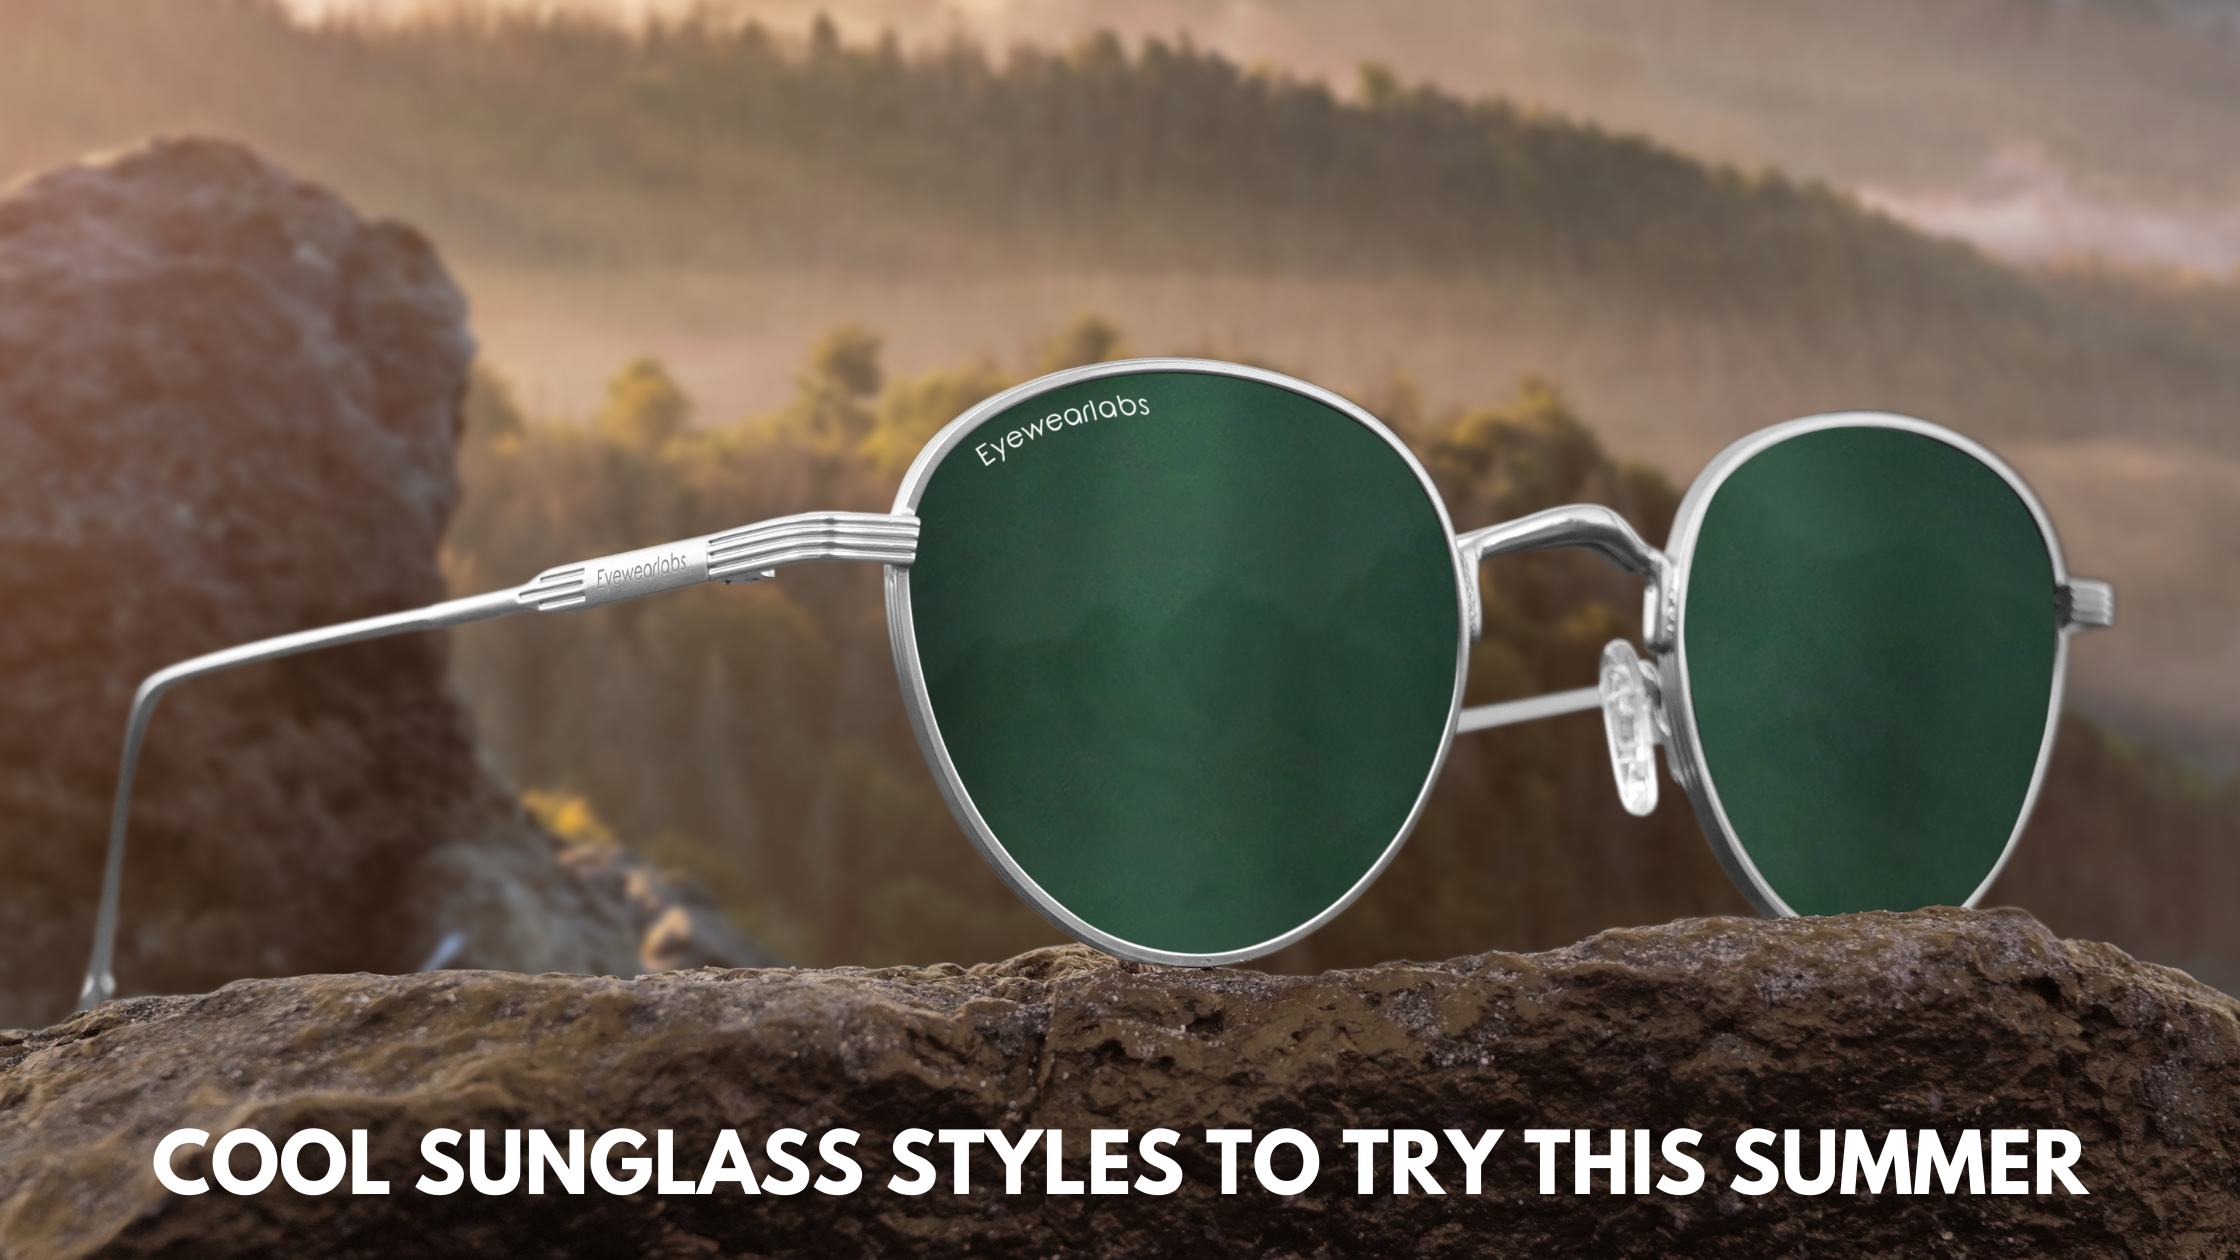 Cool Sunglass Styles To Try This Summer